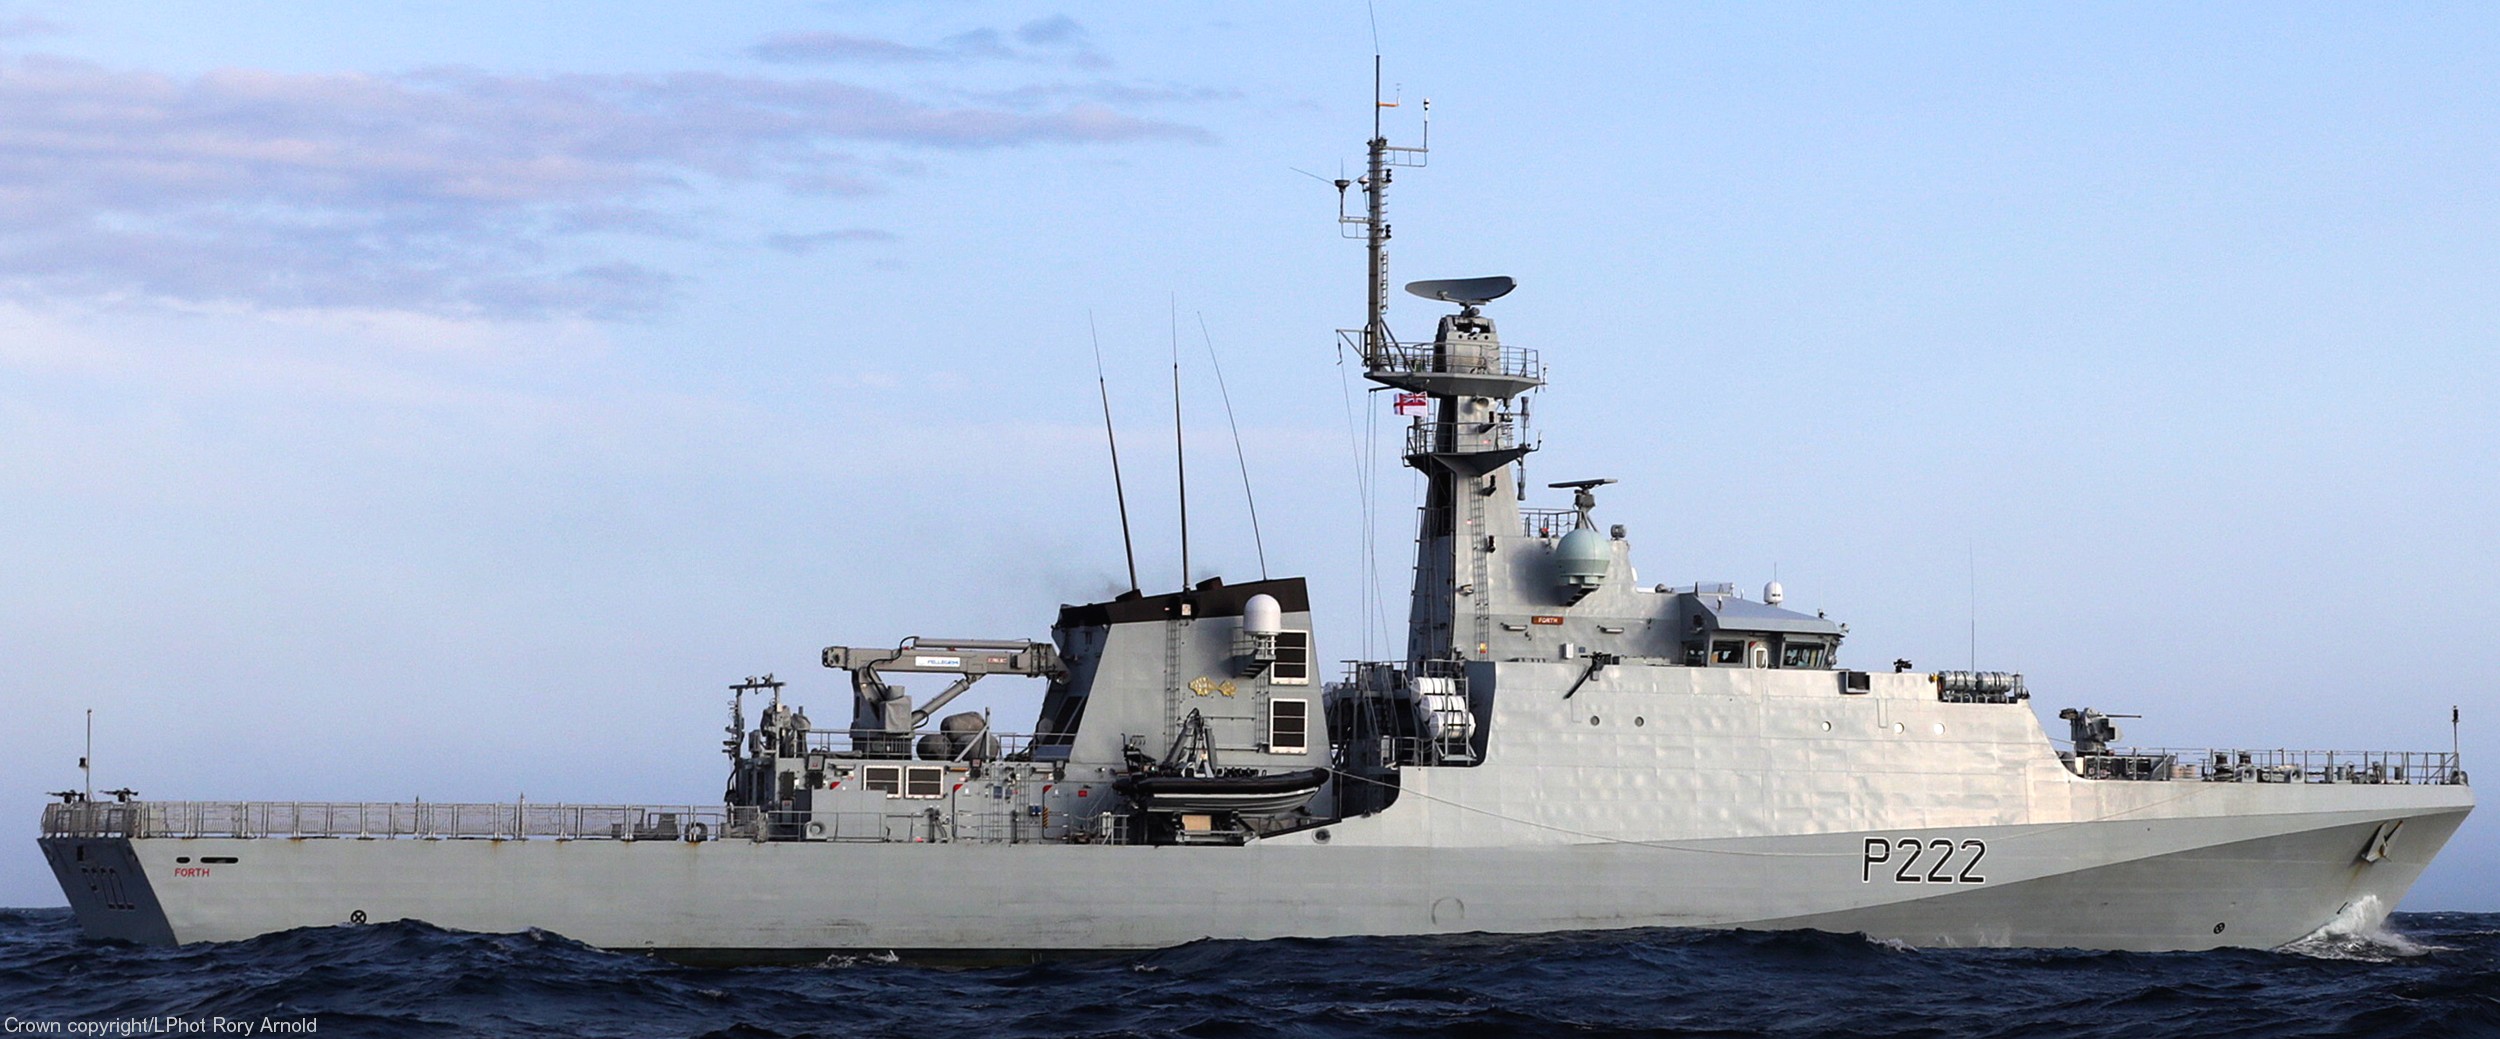 p222 hms forth river class offshore patrol vessel opv royal navy 11